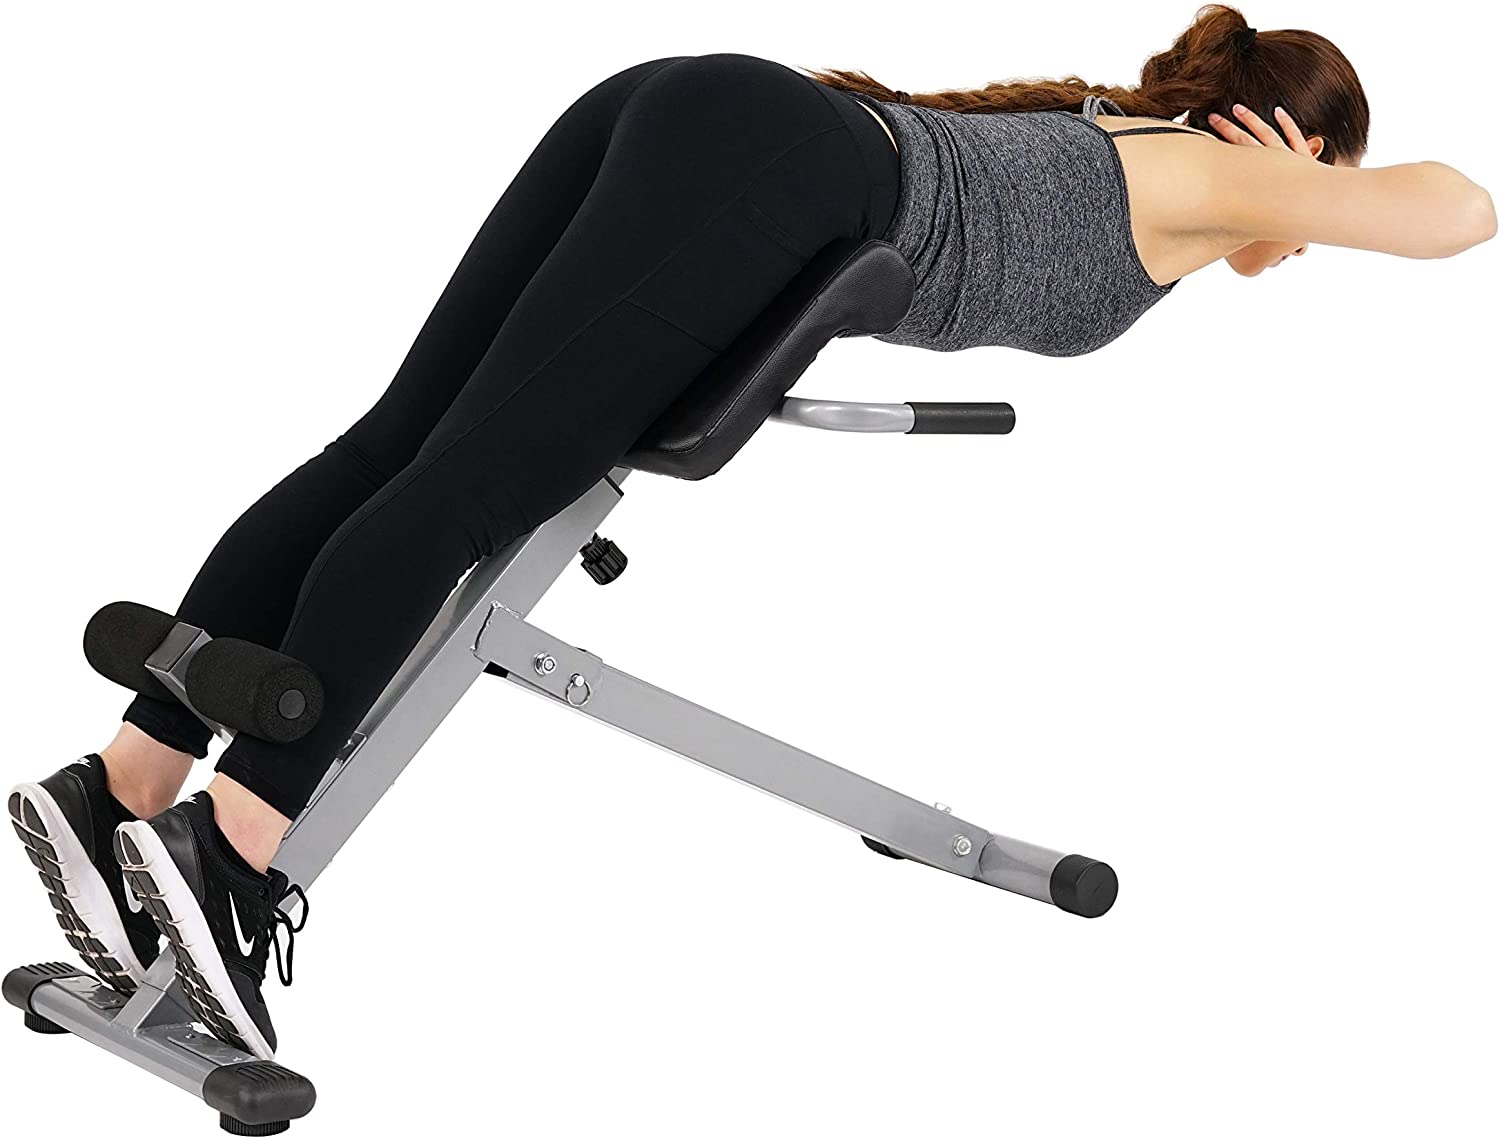 Bench Workout Hyperextension 45 Degree Exercise Chair Home Gym